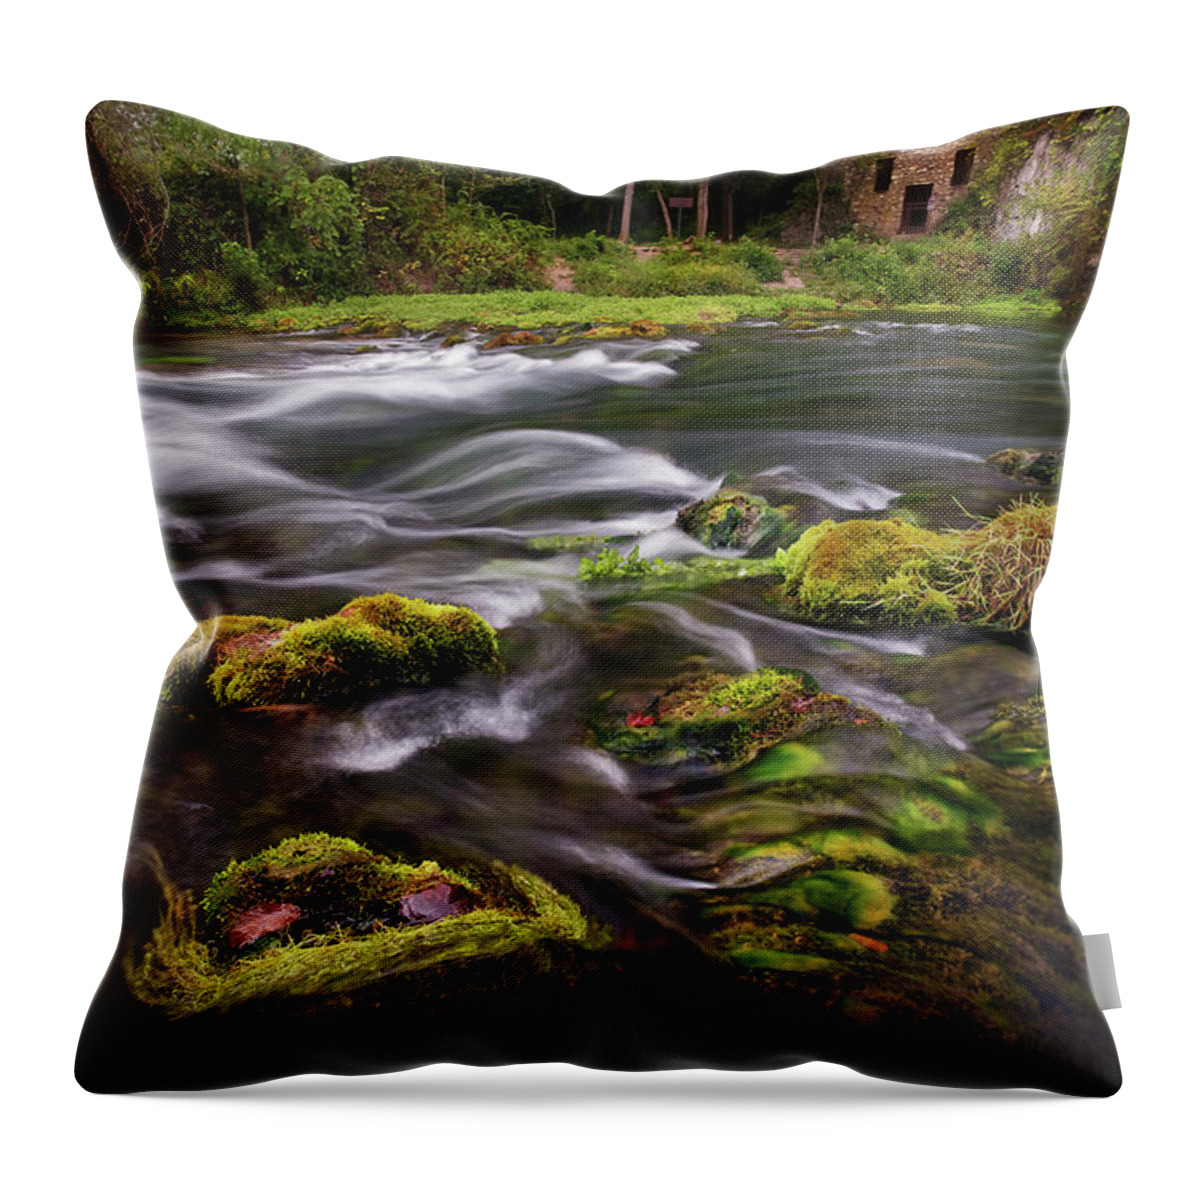 Welch Spring Throw Pillow featuring the photograph Welch Spring by Robert Charity